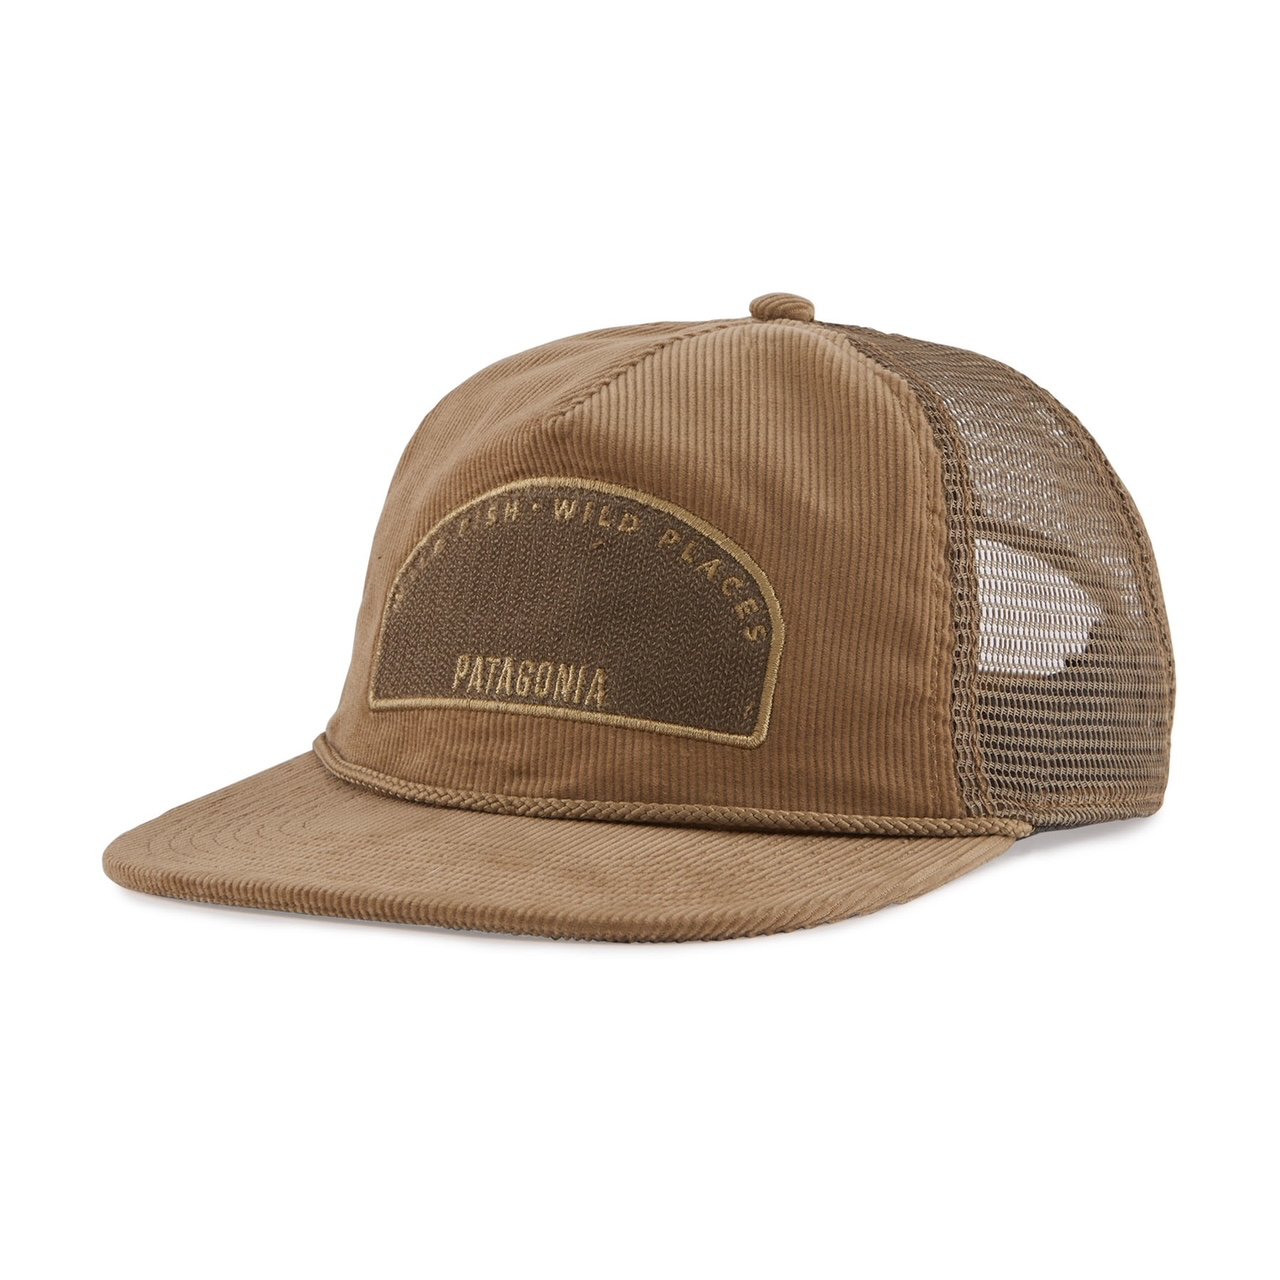 Patagonia Fly Catcher Hat - Tombstone: Classic Tan